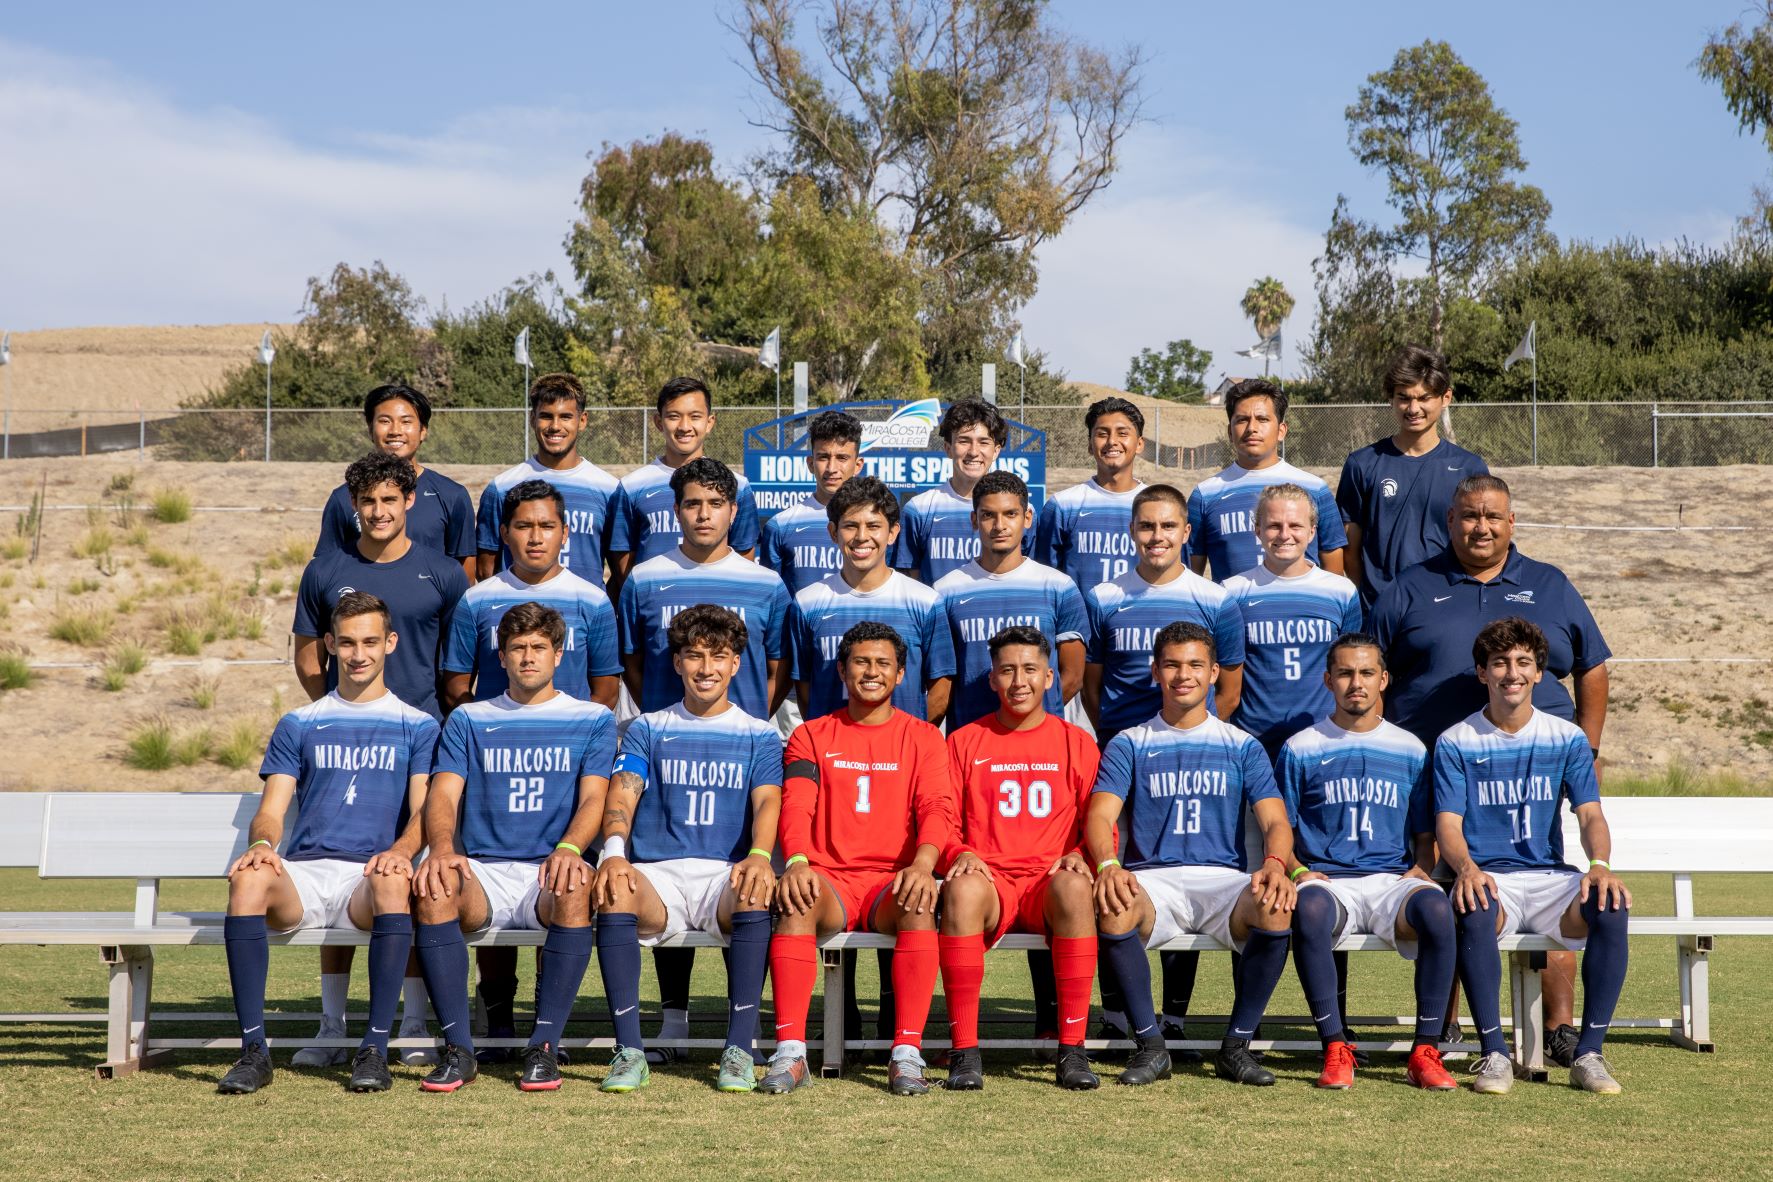 MiraCosta men's soccer team picture.